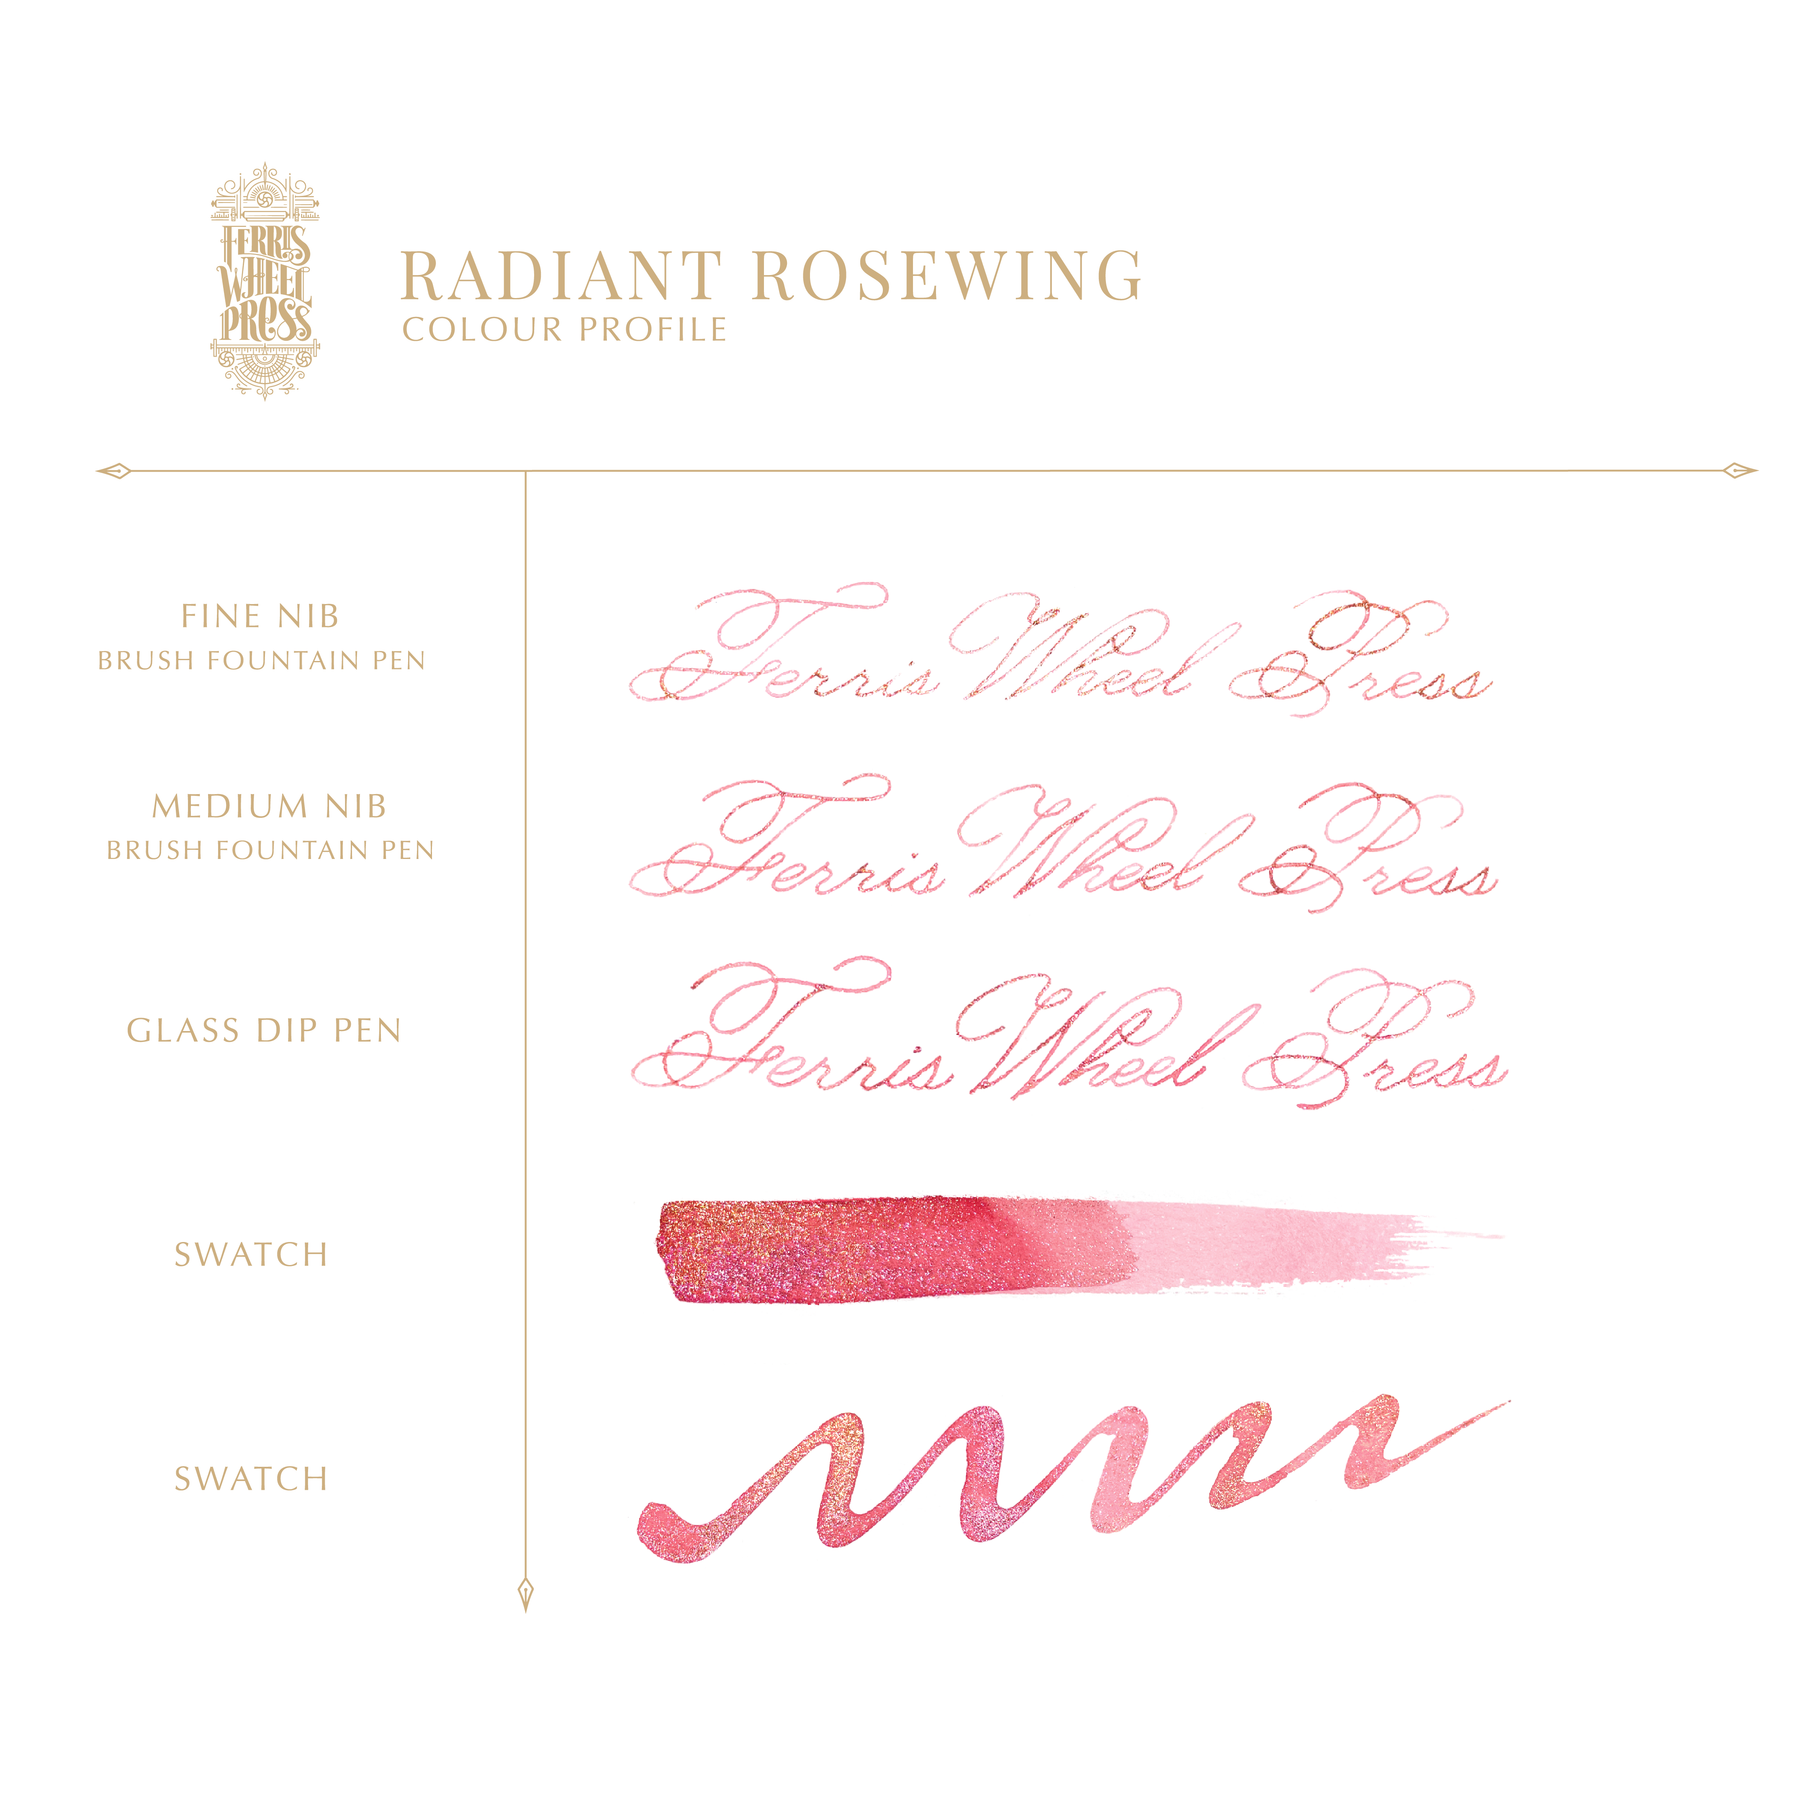 Ferris Wheel Press - The Wild Swans - Radiant Rosewing